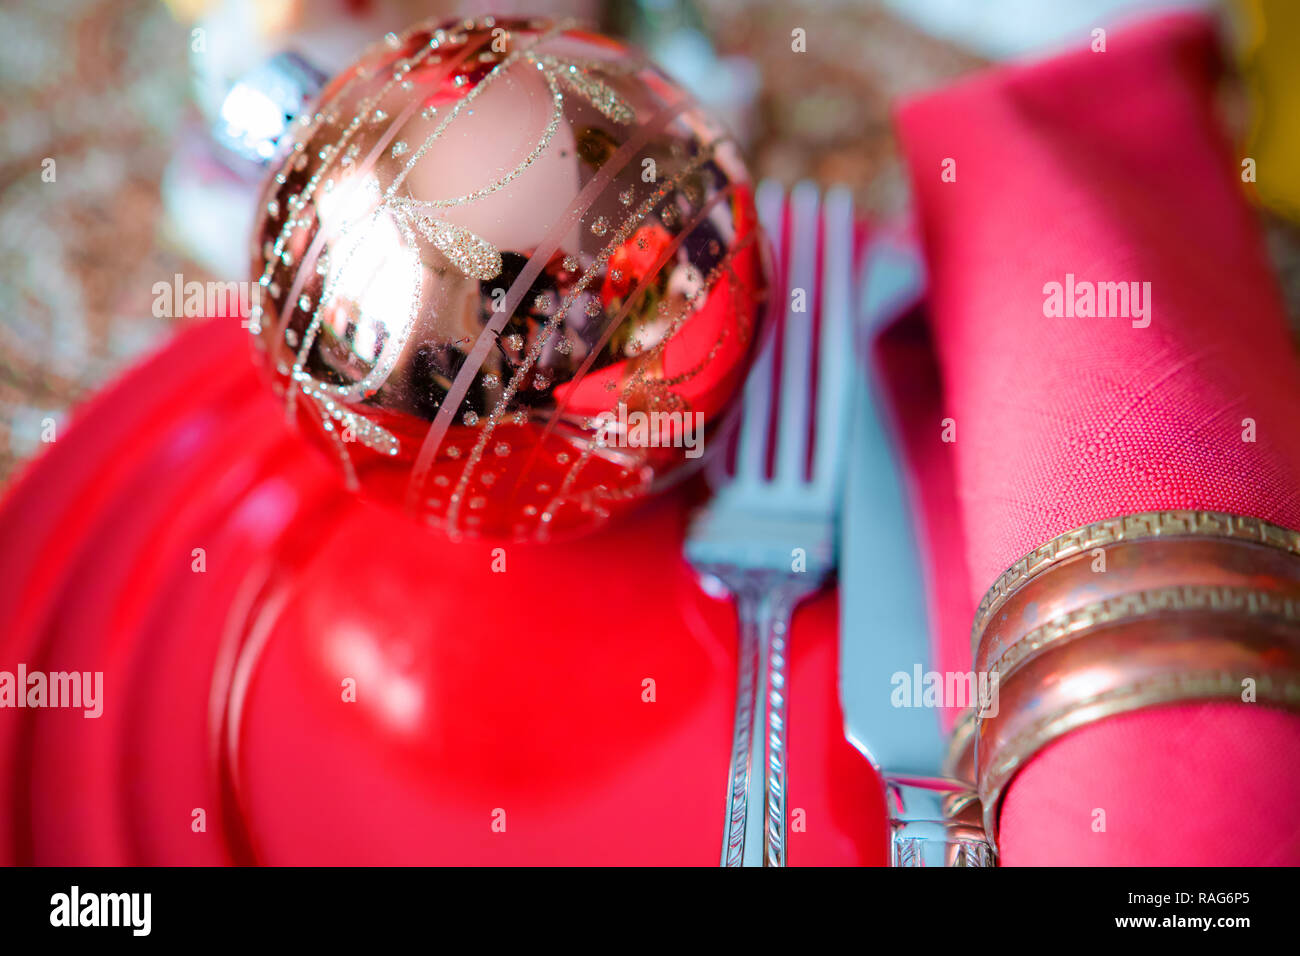 A table service prepared for Christmas or New Year Eve. Stock Photo